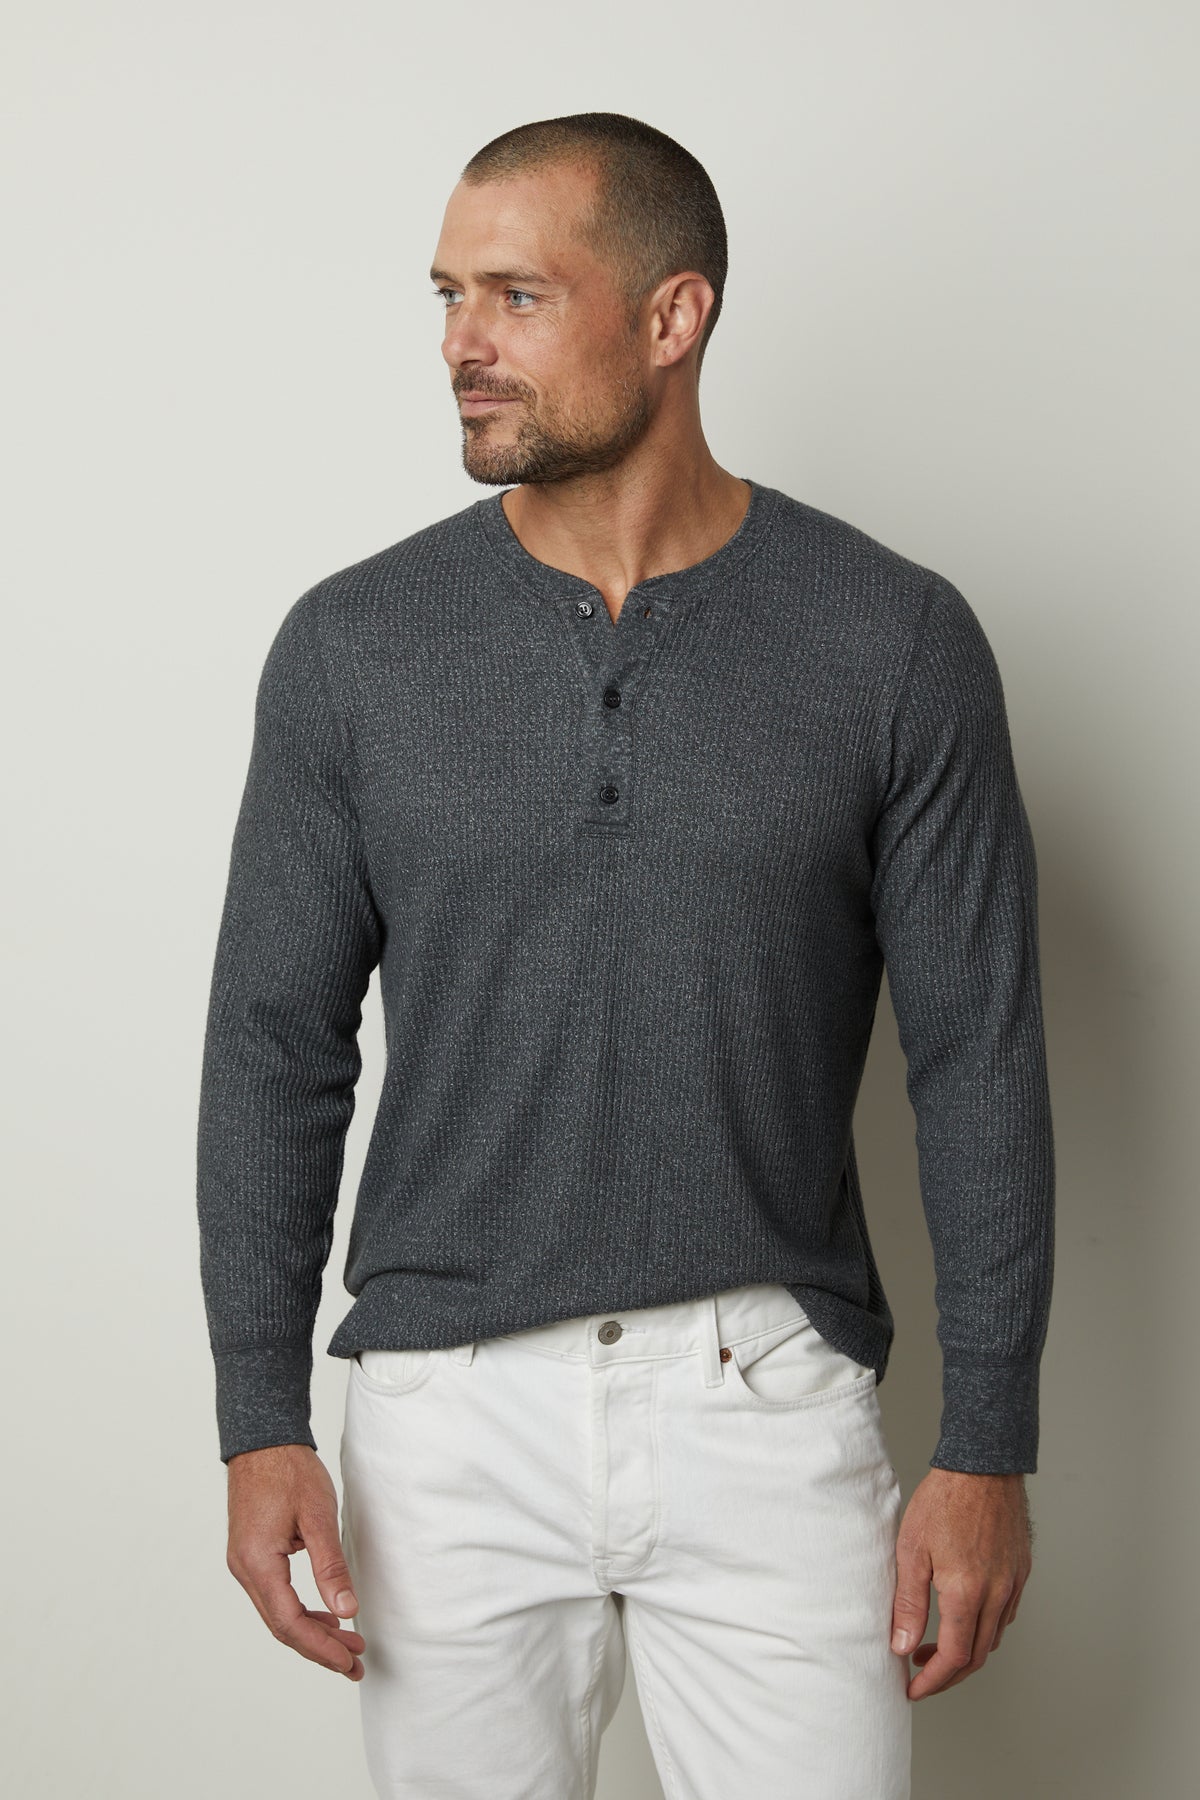 A man wearing a grey Velvet by Graham & Spencer ANTHONY THERMAL HENLEY shirt.-35547473838273